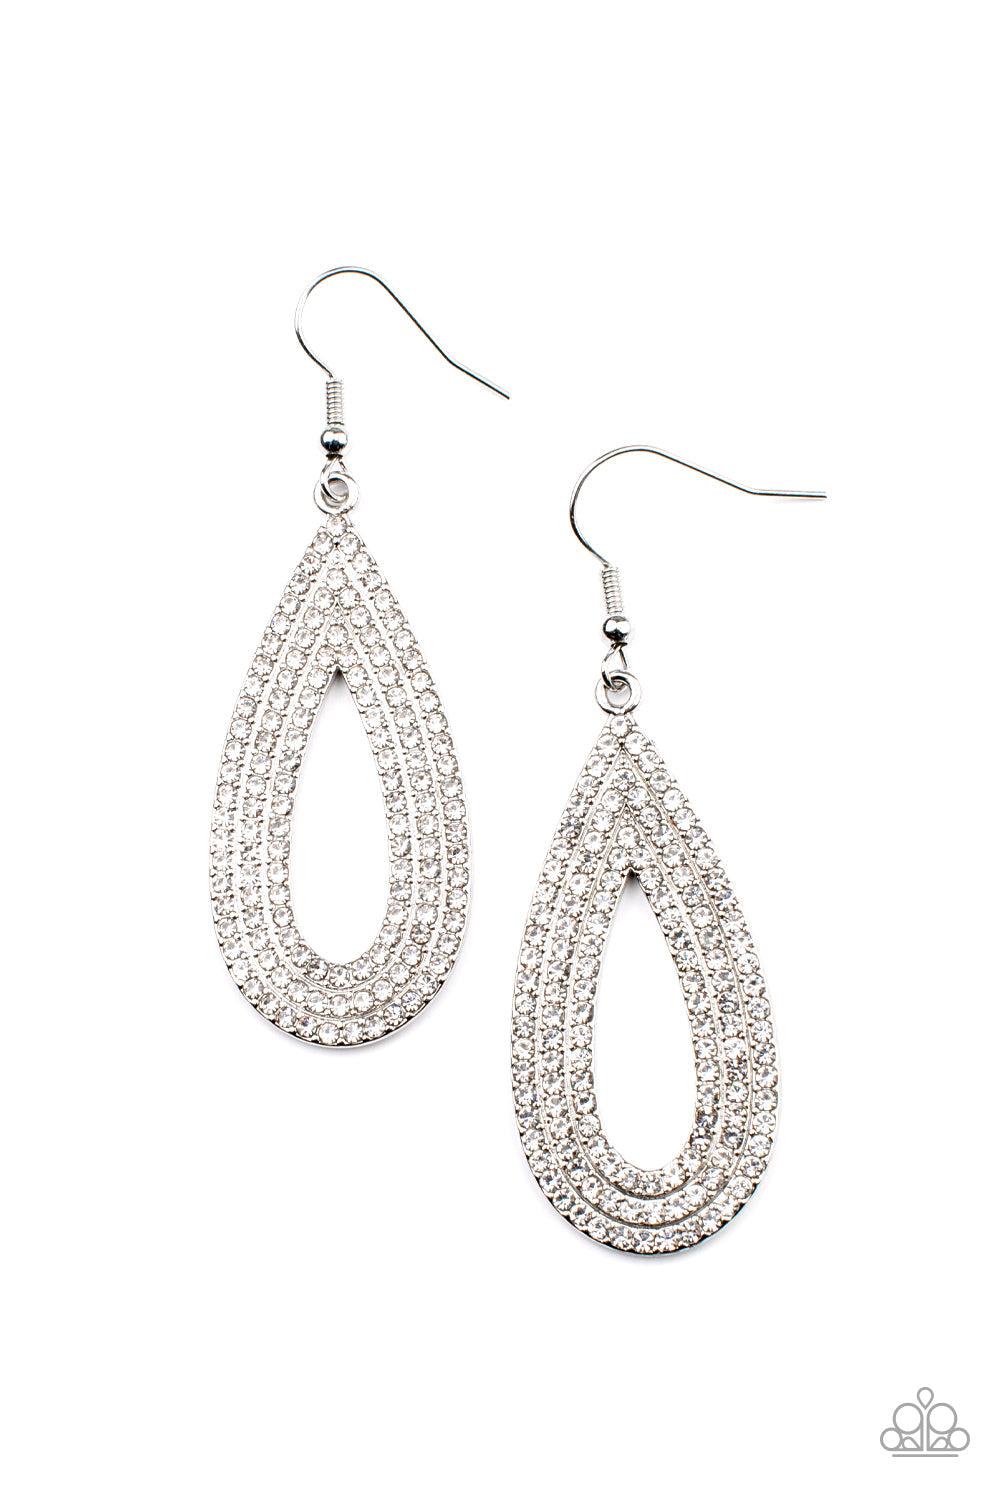 Exquisite Exaggeration - White Rhinestone Encrusted Silver Teardrop Paparazzi Earrings